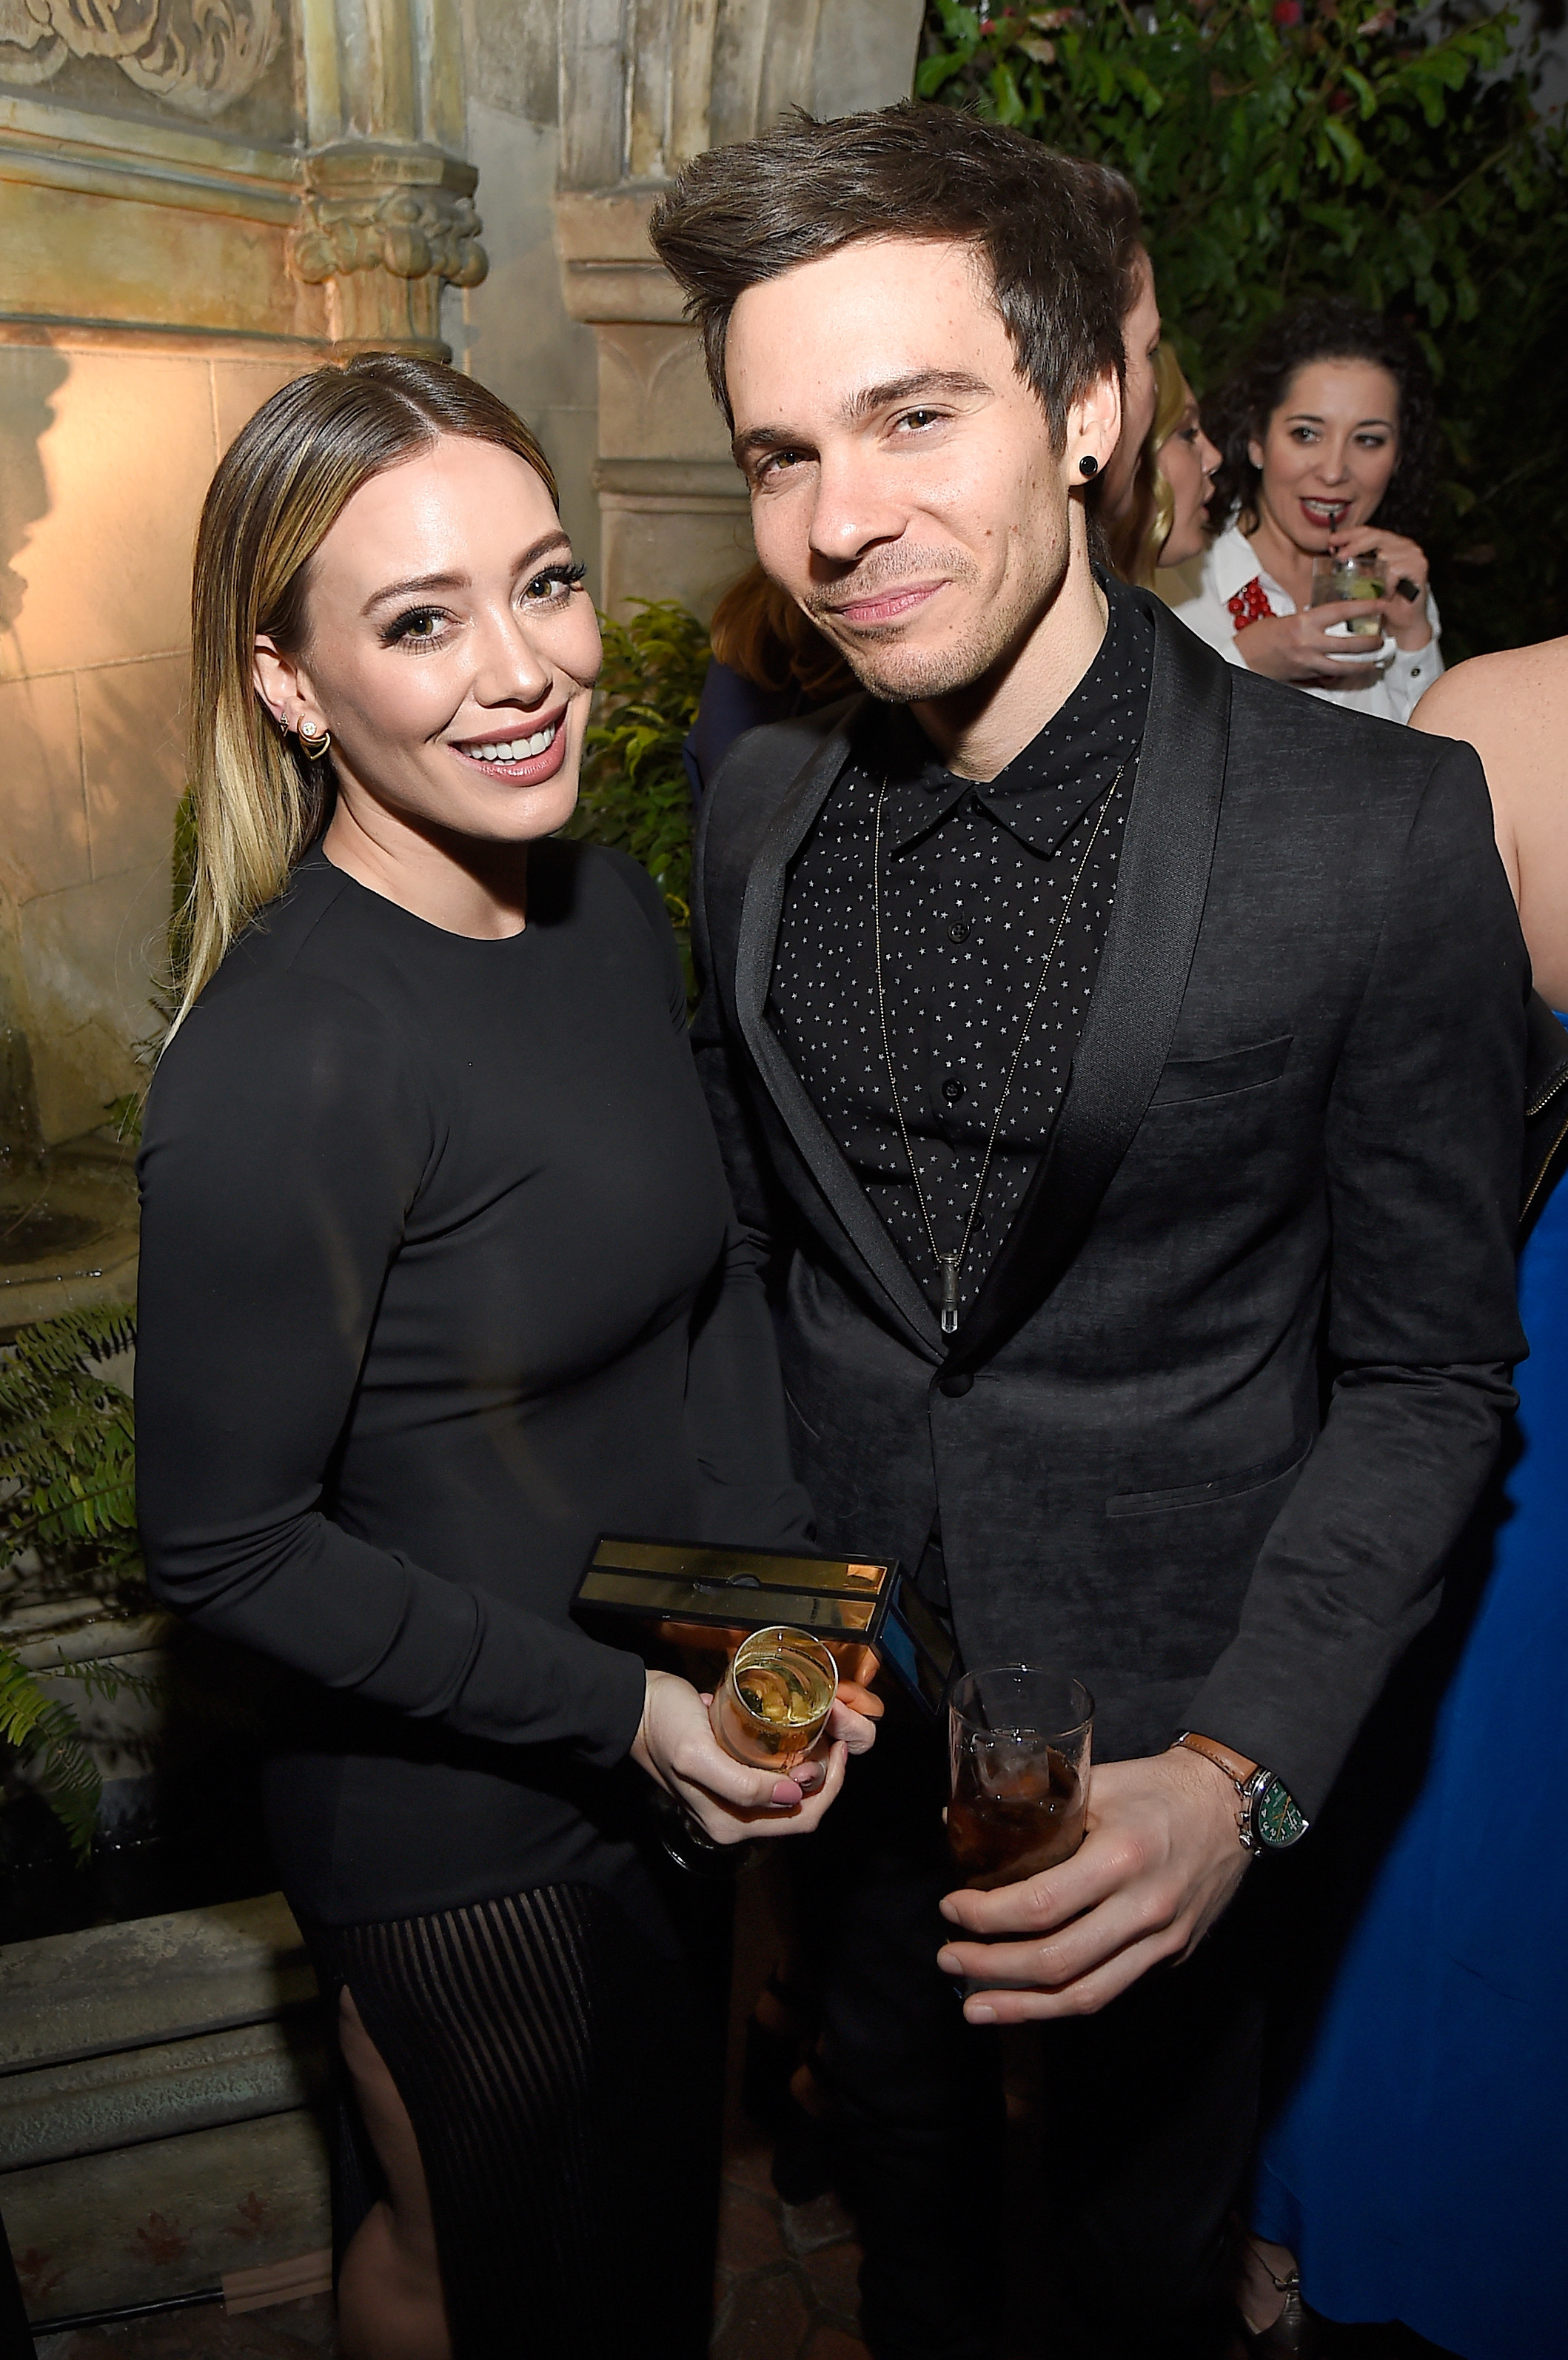 Hilary Duff and Matthew Koma at an event together